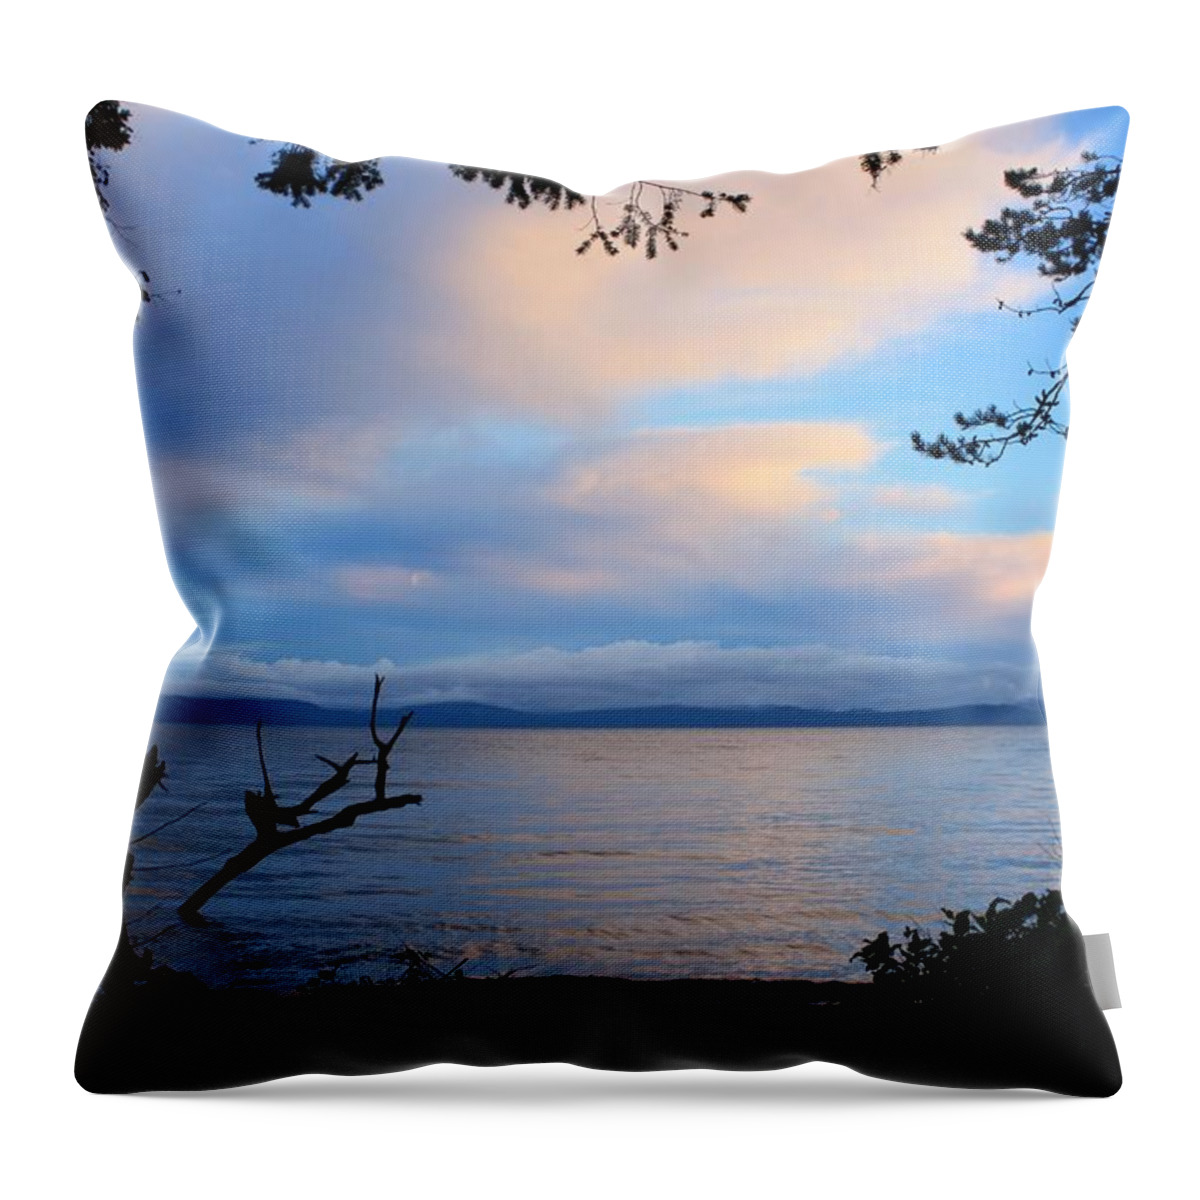 Vancouver Island Throw Pillow featuring the photograph Sunrise Clouds by Gerry Bates